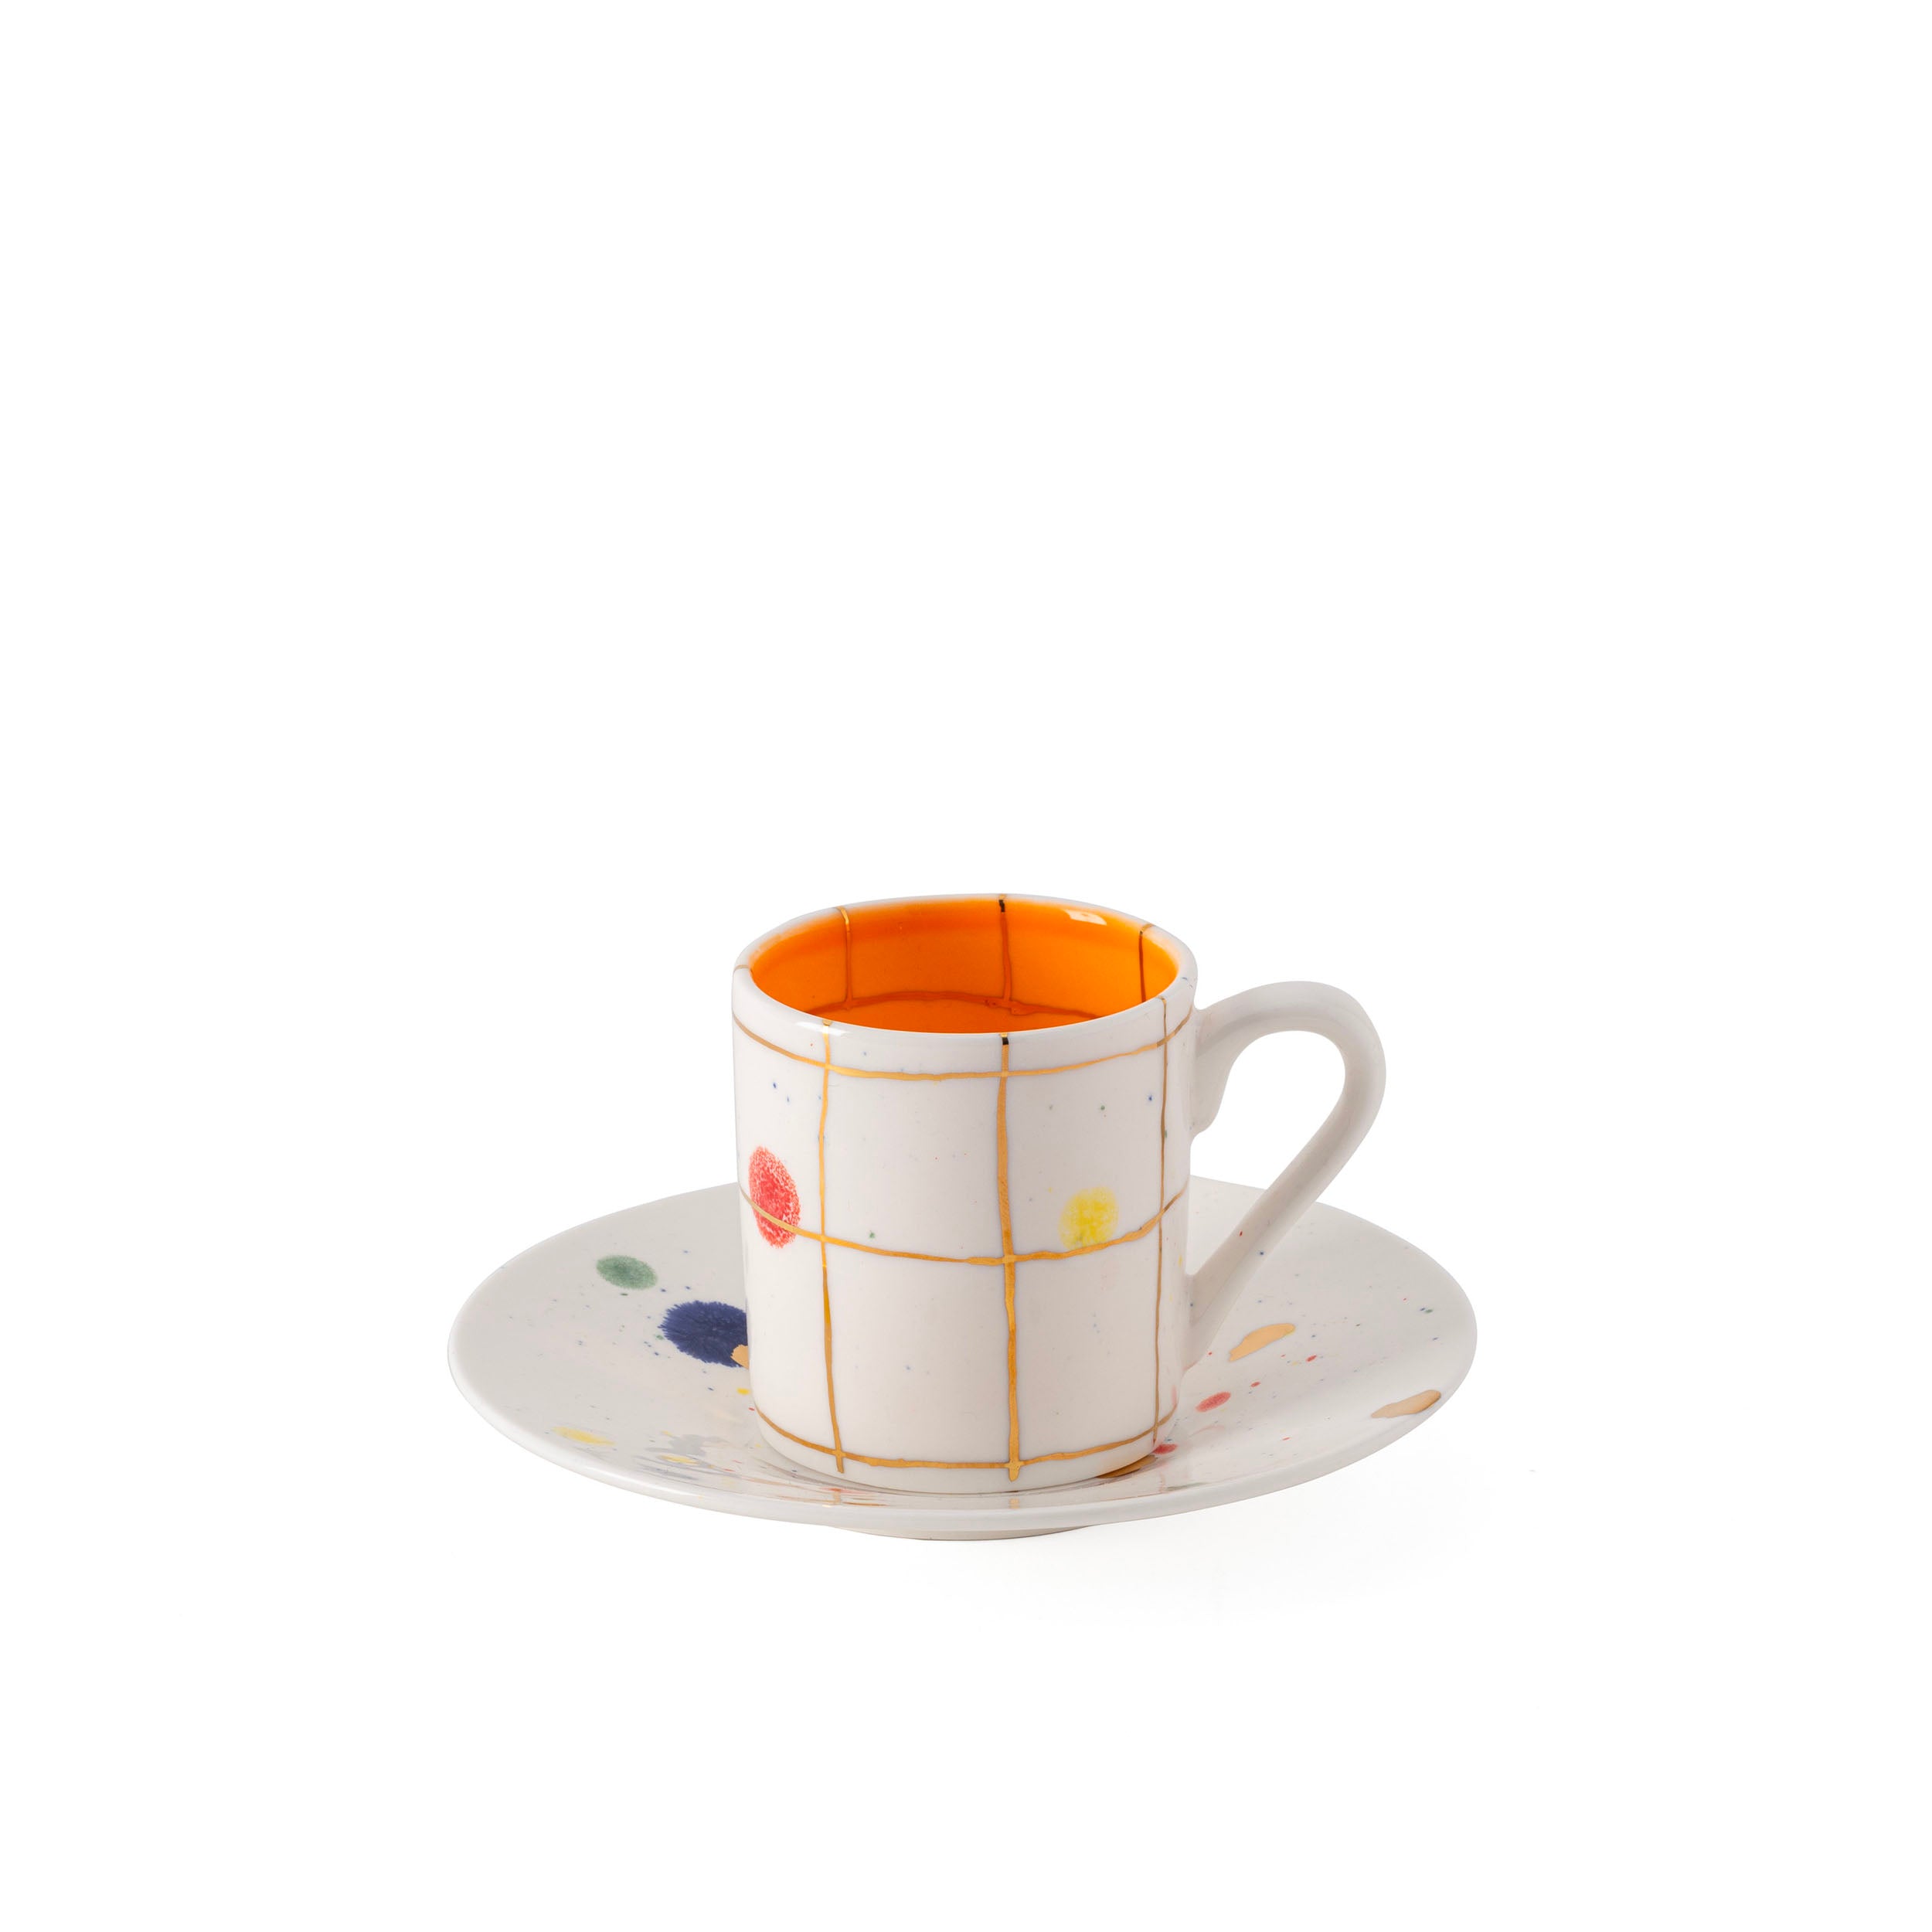 Miami Straight Coffee Cup & Saucer